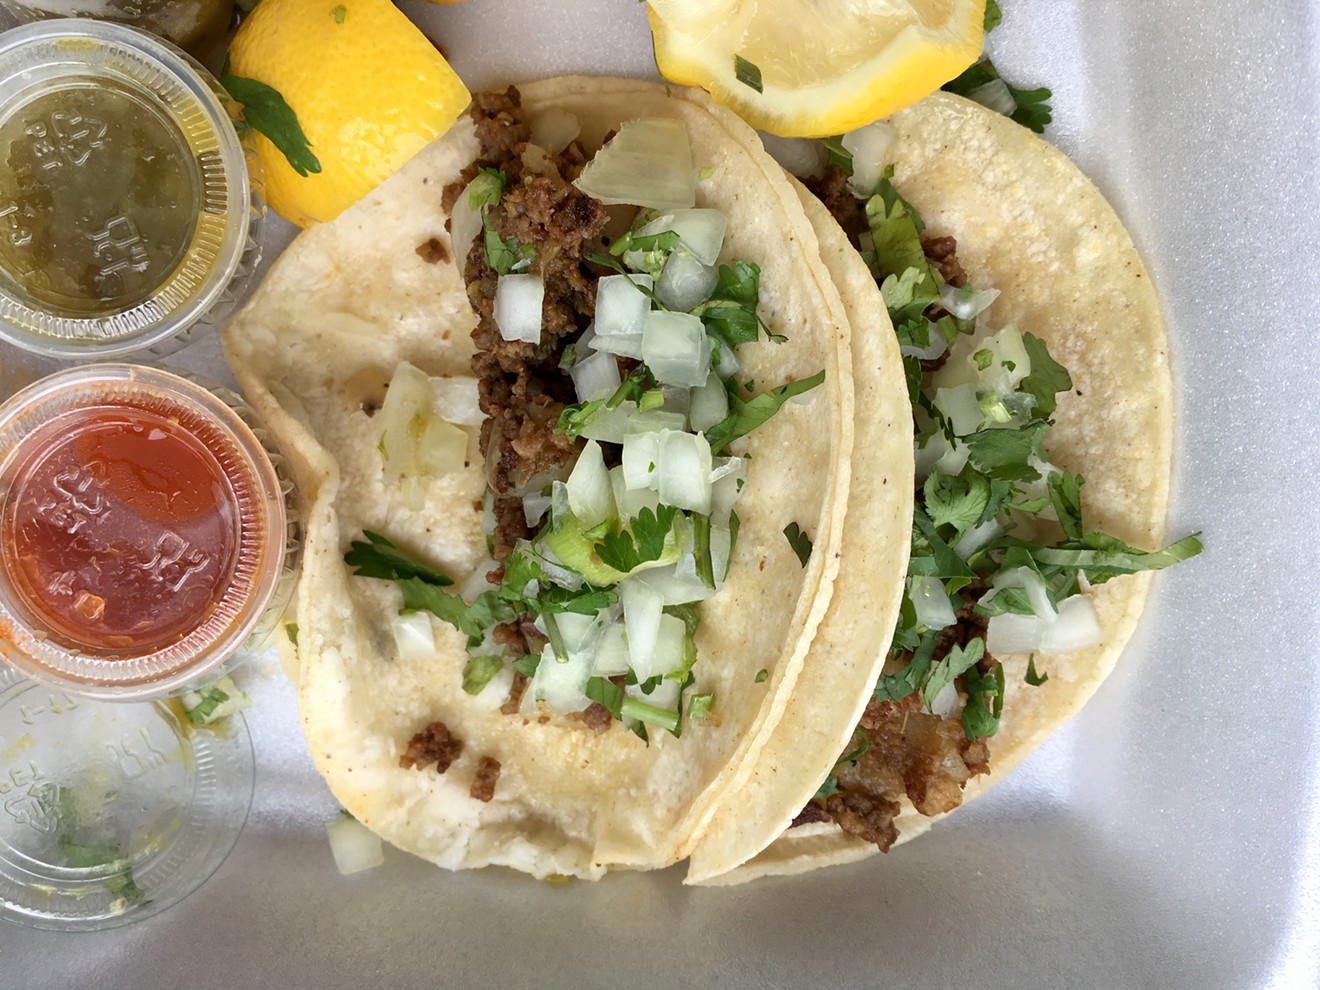 Fuel City's taco window is open 24 hours, and each taco is less than two bucks.